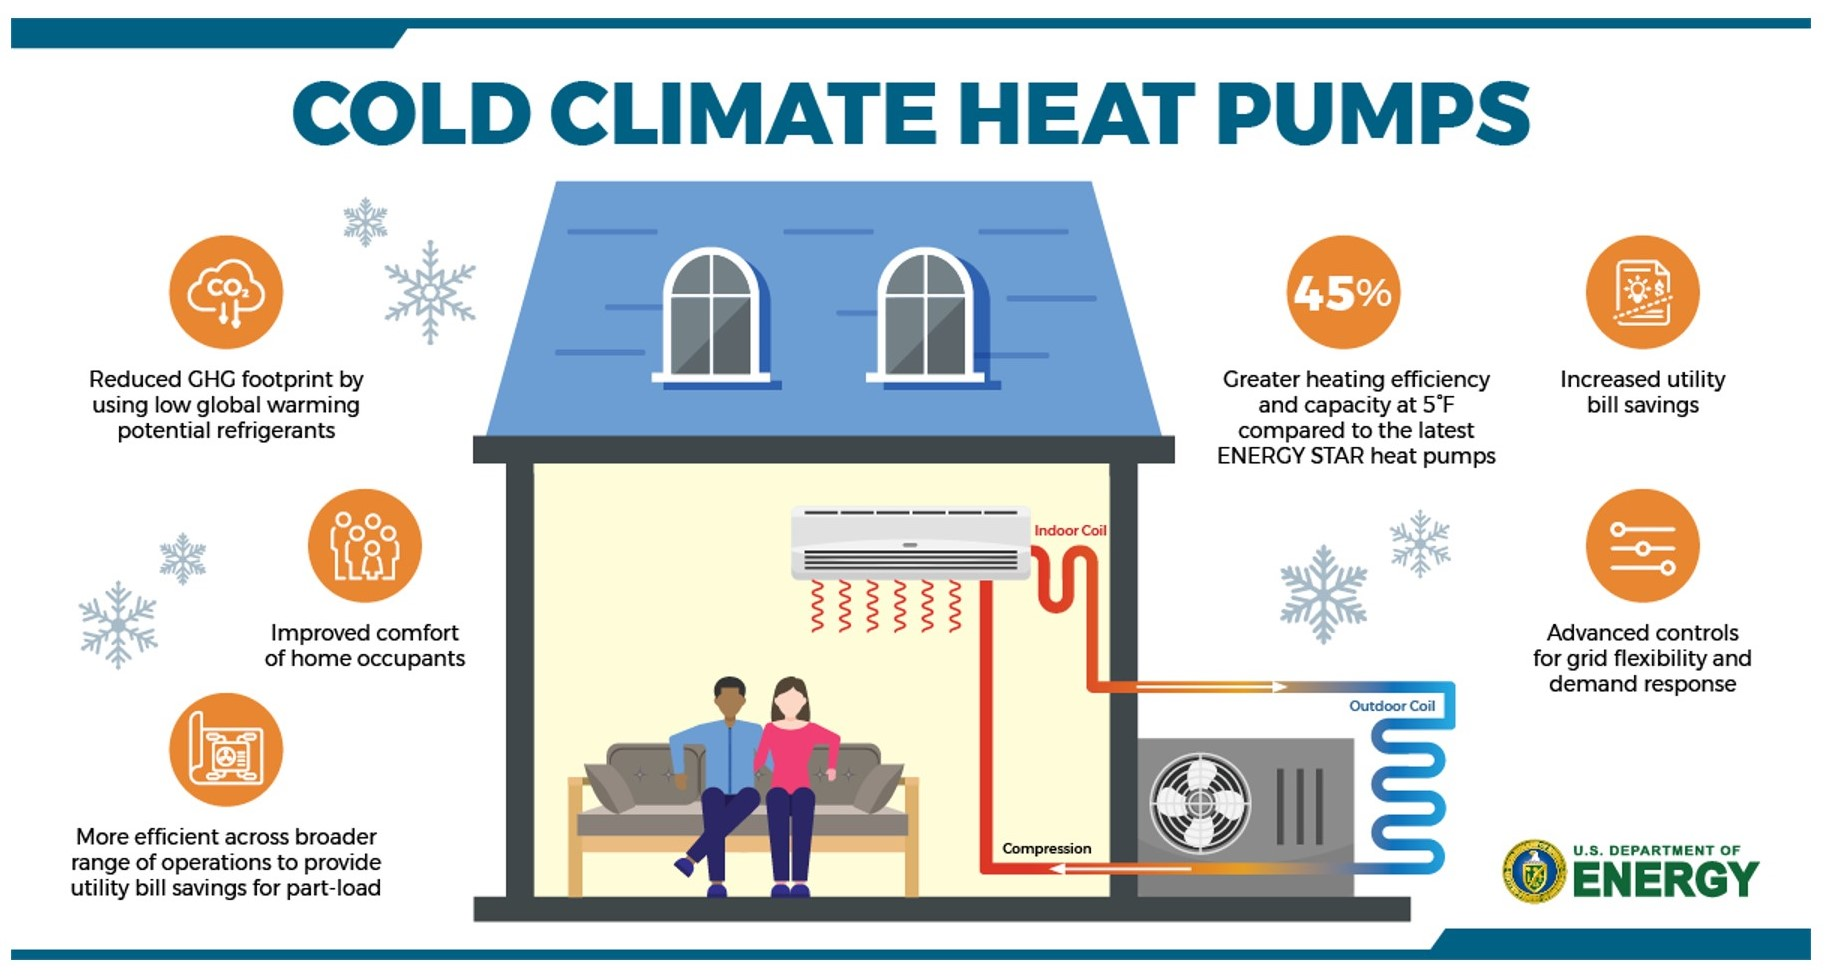 Infographic showing advantages of heat pumps optimized for cold climates